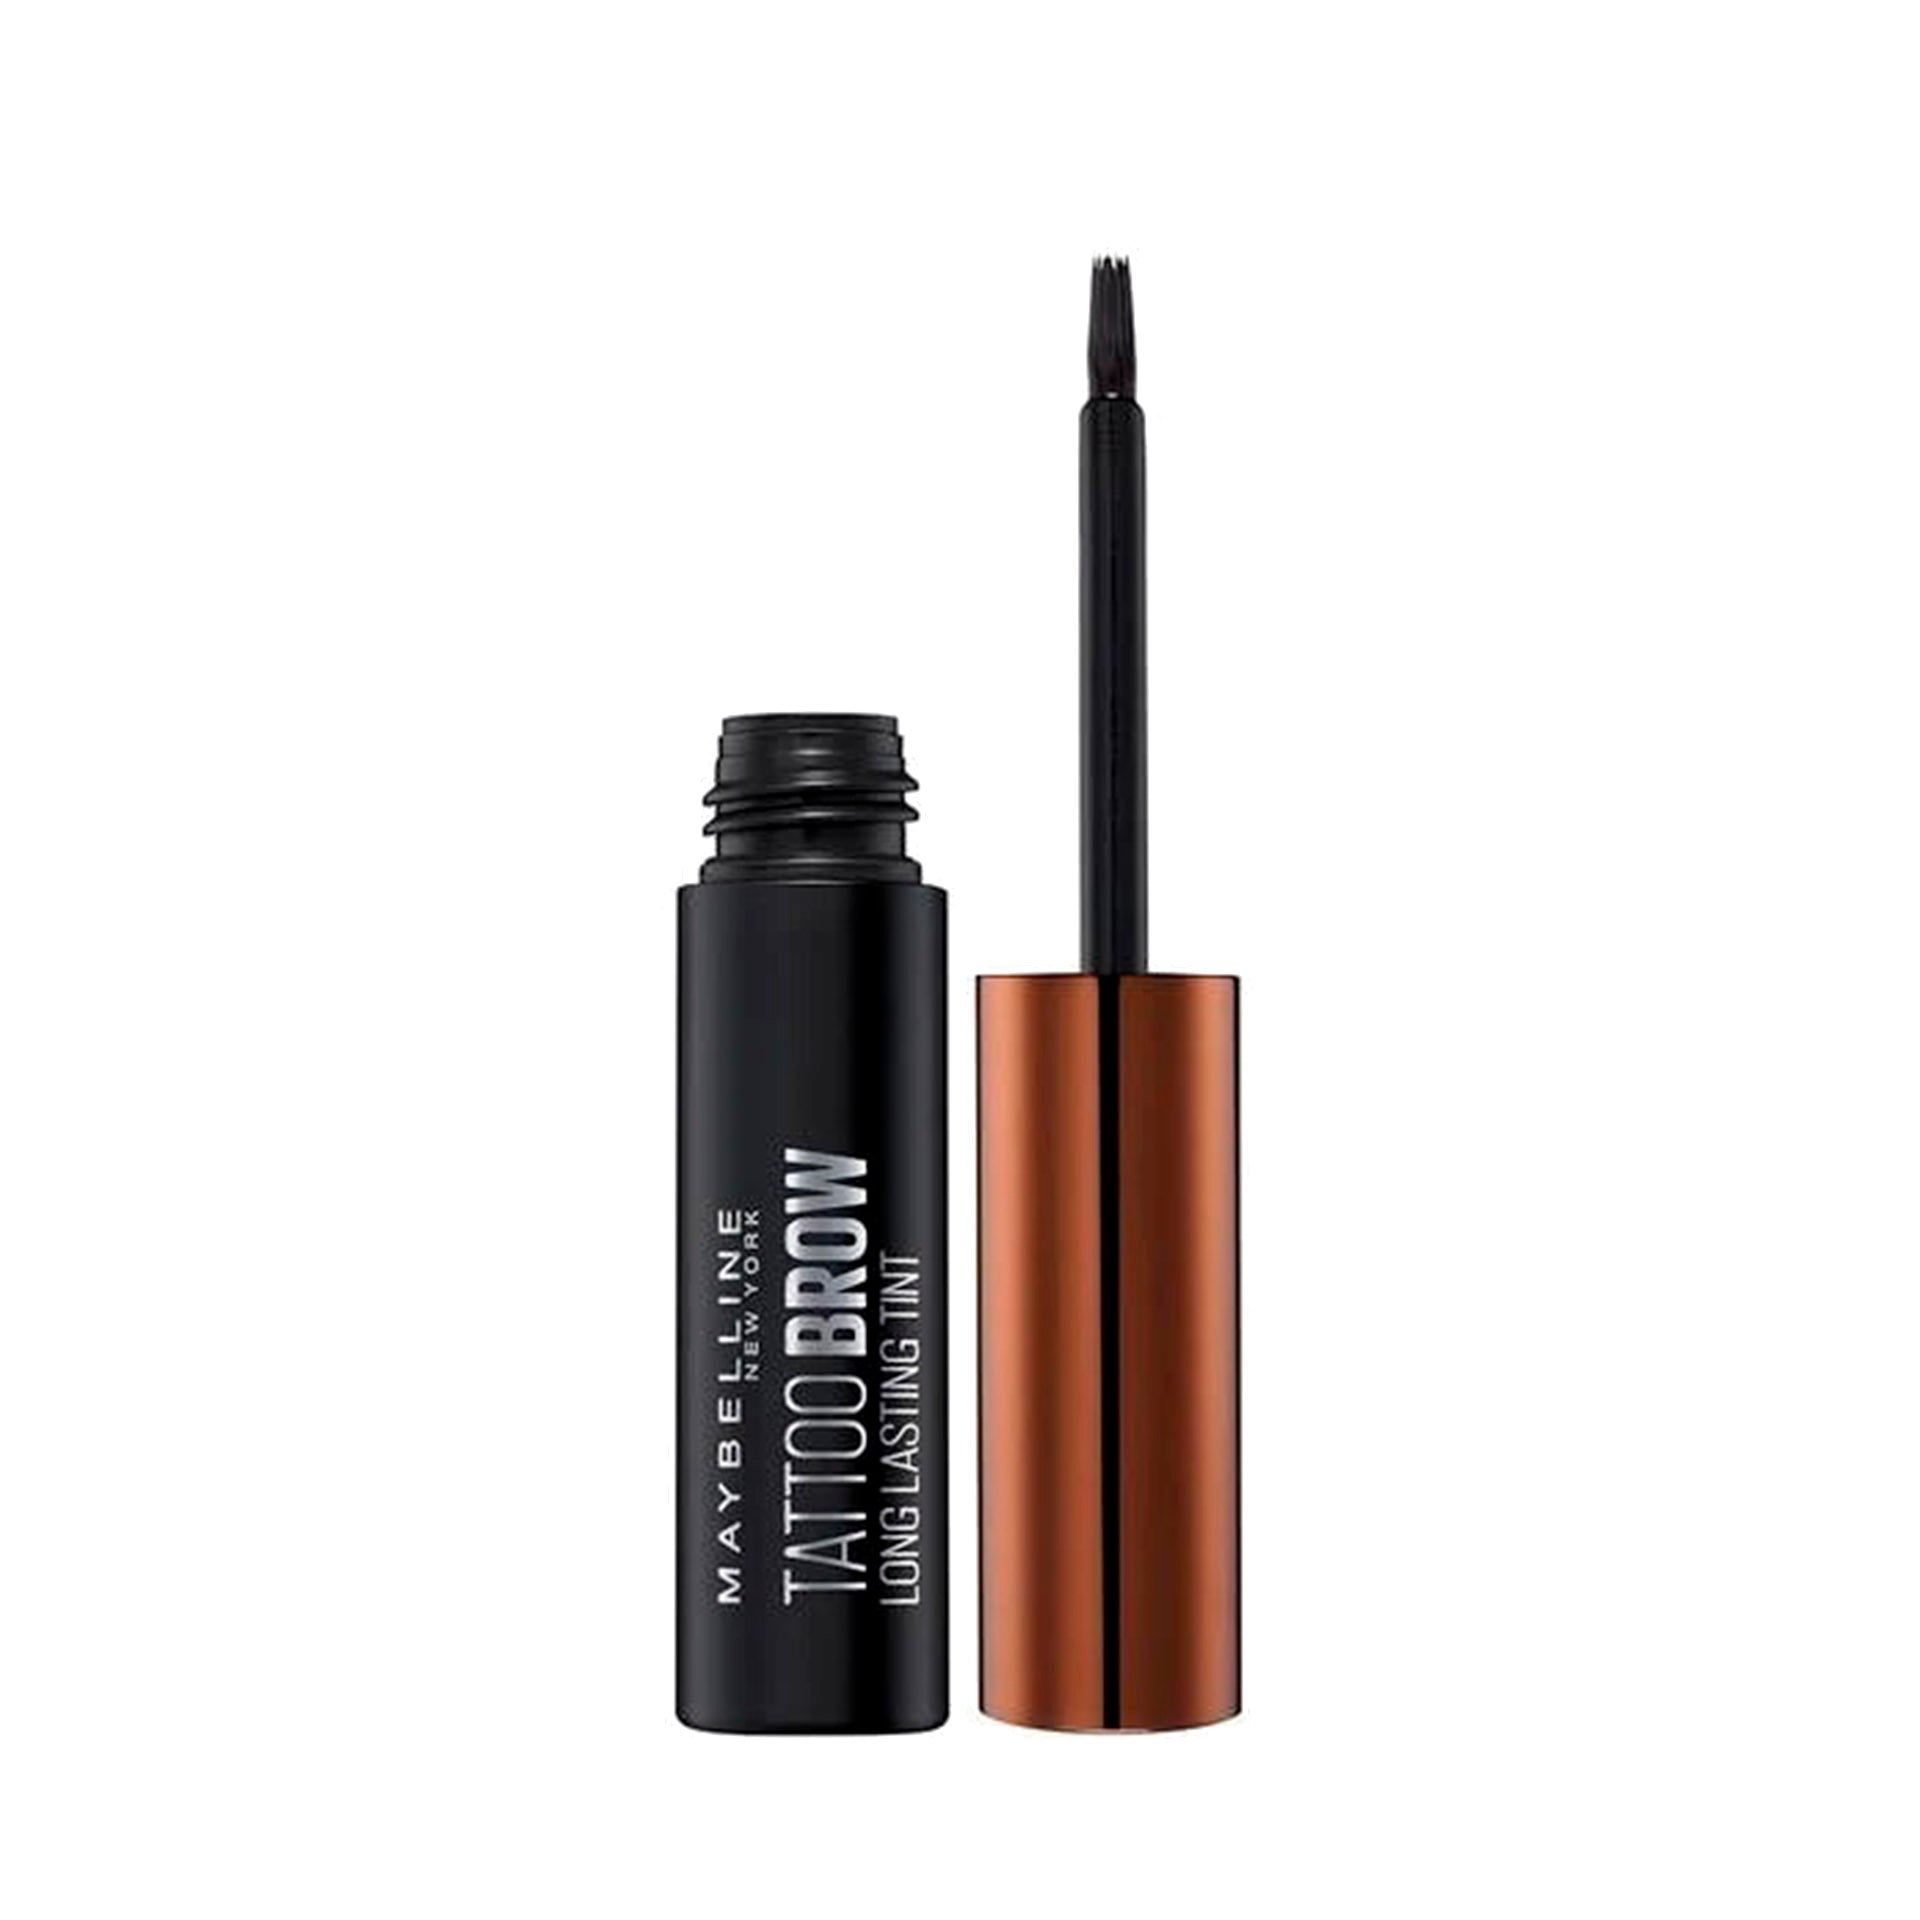 Maybelline Tattoo Brow Eyebrow Ink Ink Light Brown